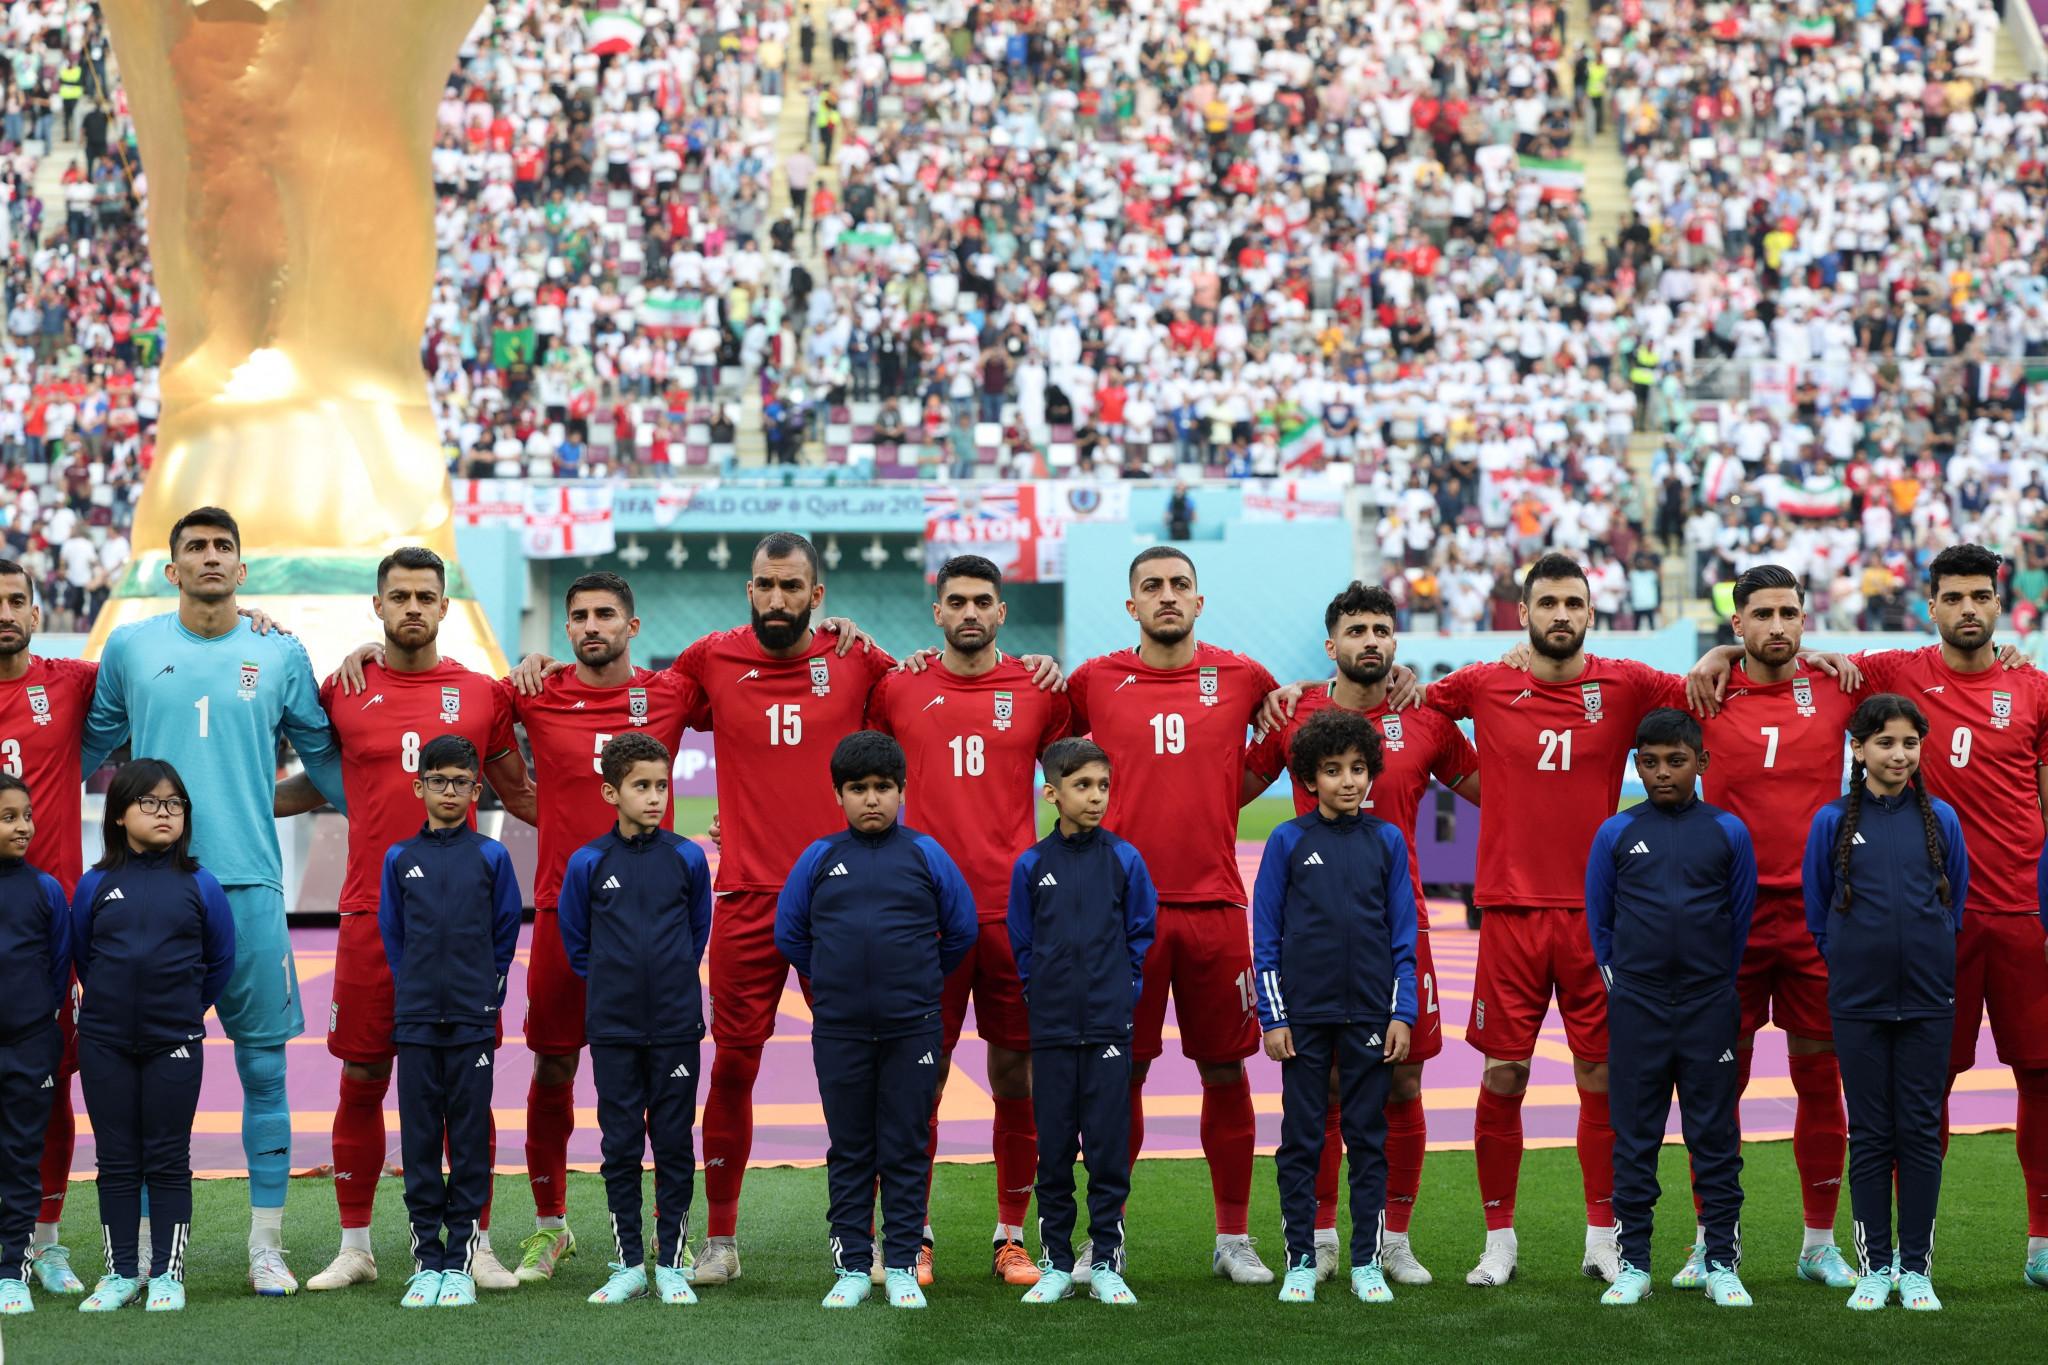 Iranian football team choose not to sing national anthem in apparent show of support for protests